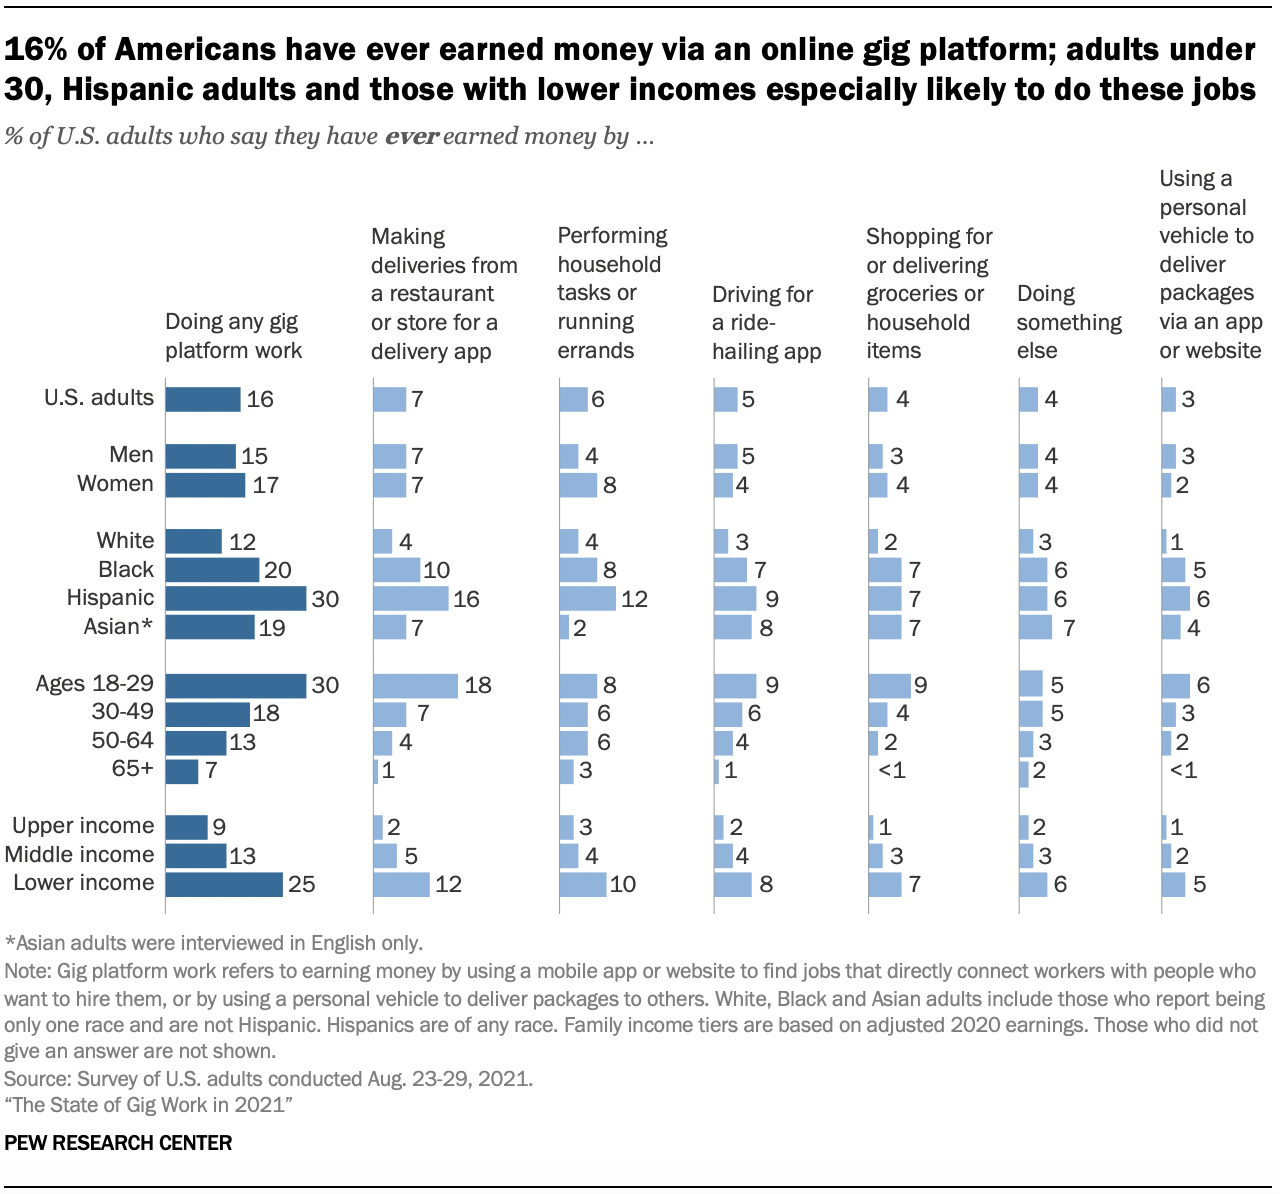 16% of Americans have ever earned money via an online gig platform; adults under 30, Hispanic adults and those with lower incomes especially likely to do these jobs